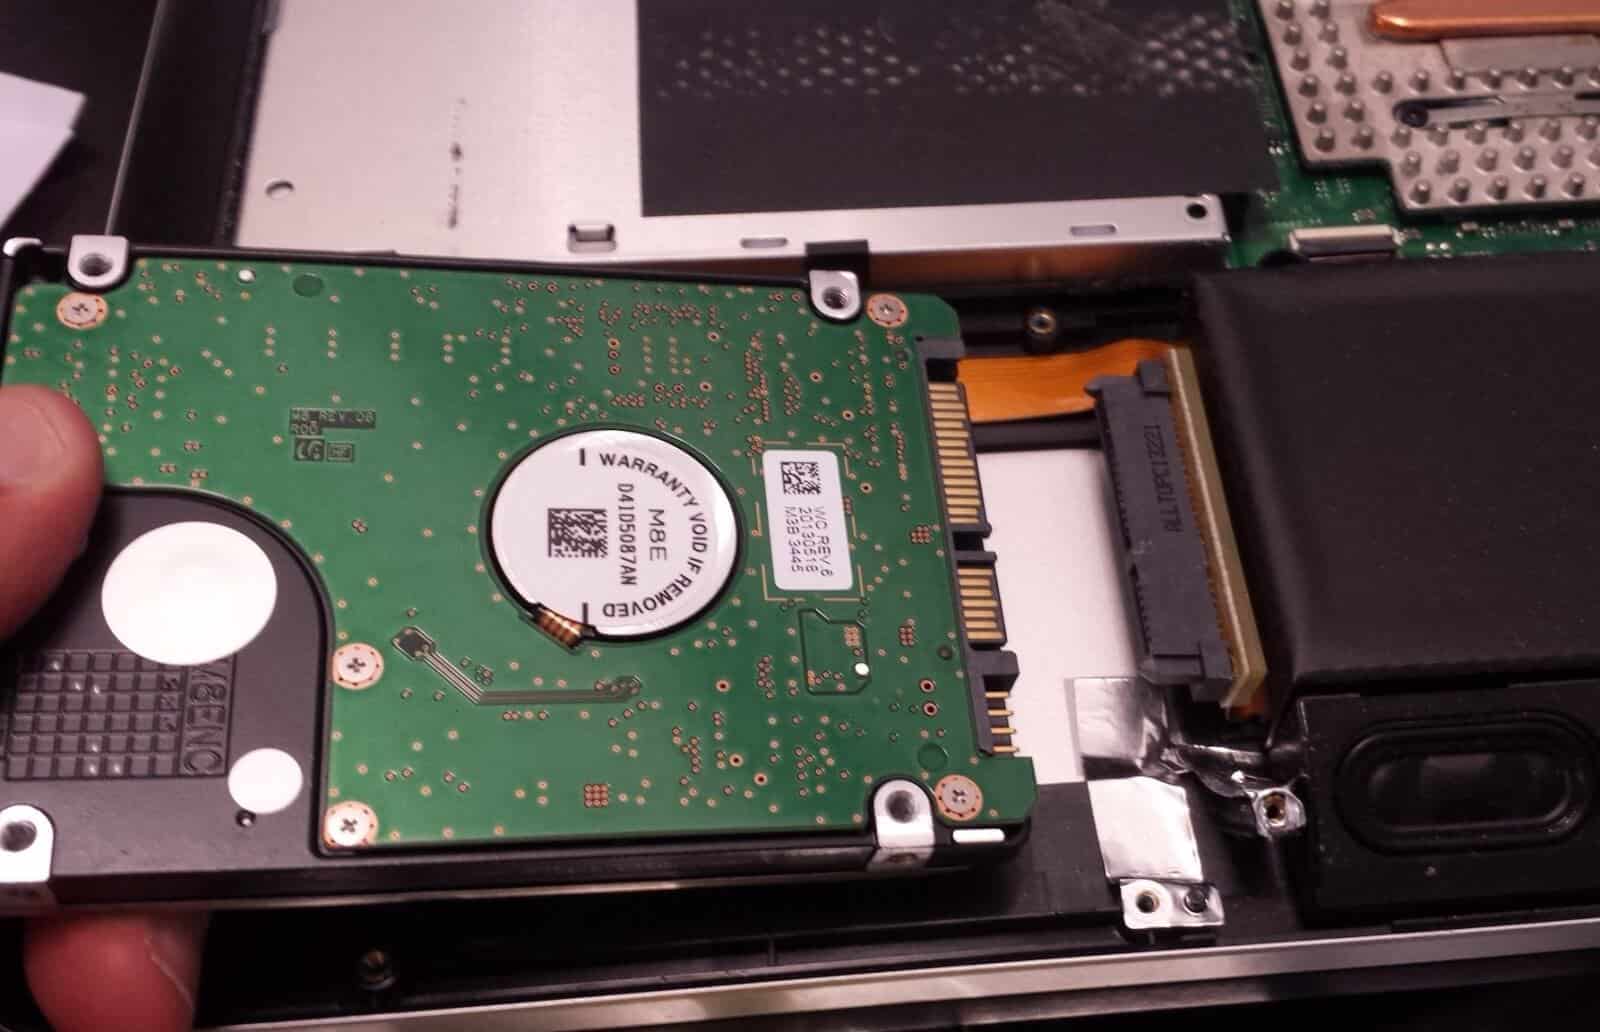 Removing the laptop's hard disk